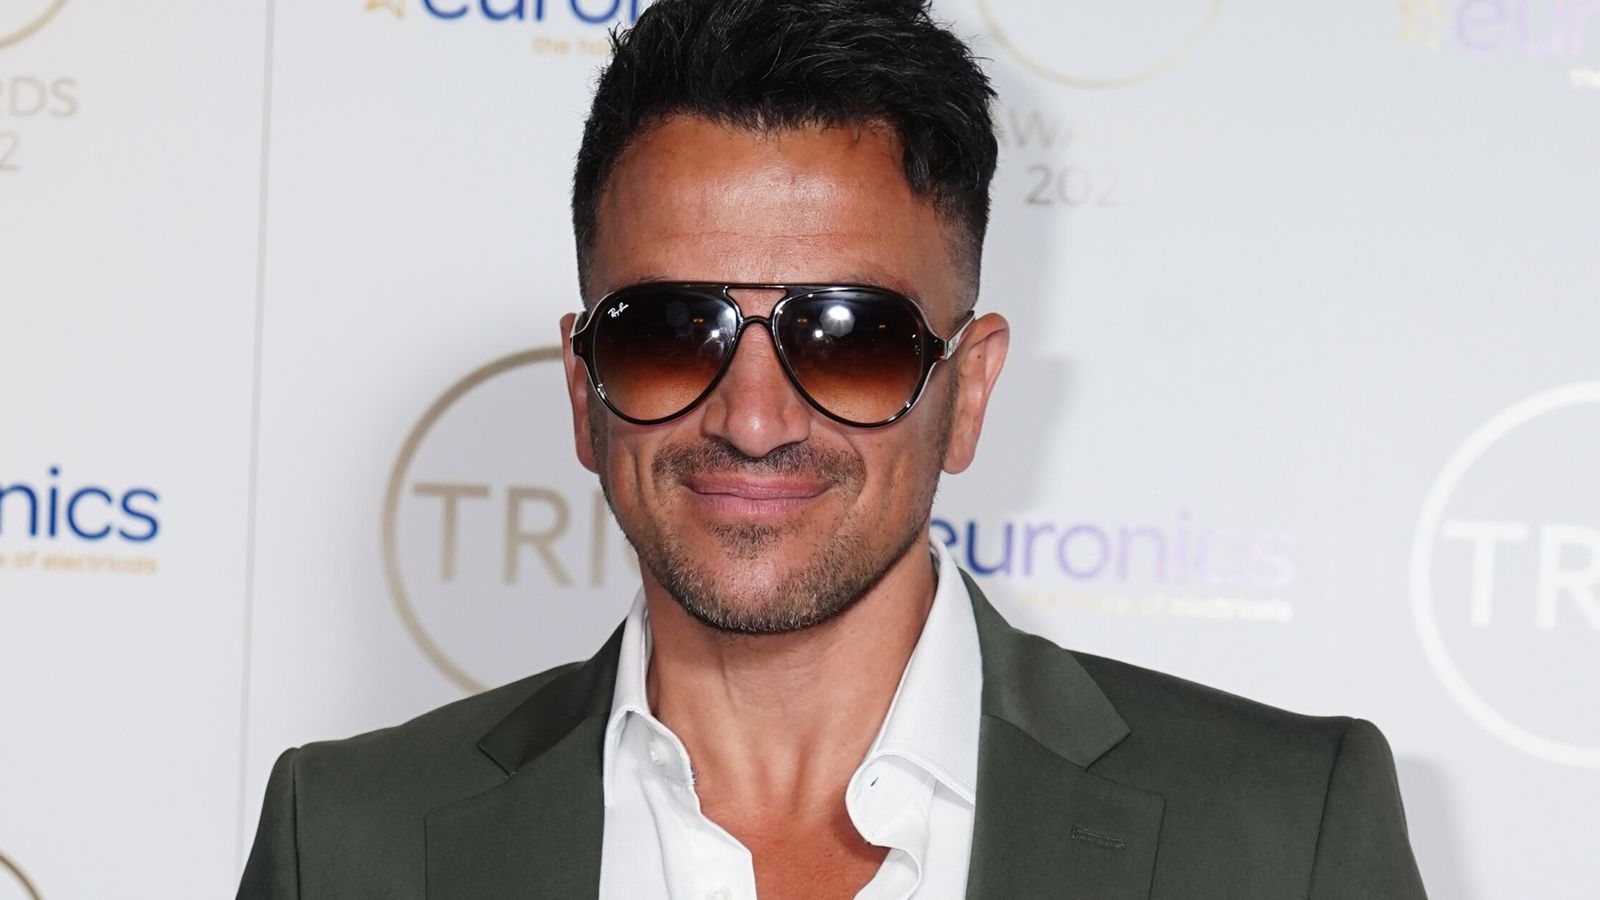 Peter Andre's house 'struck by lightning' as thunderstorms batter southern England